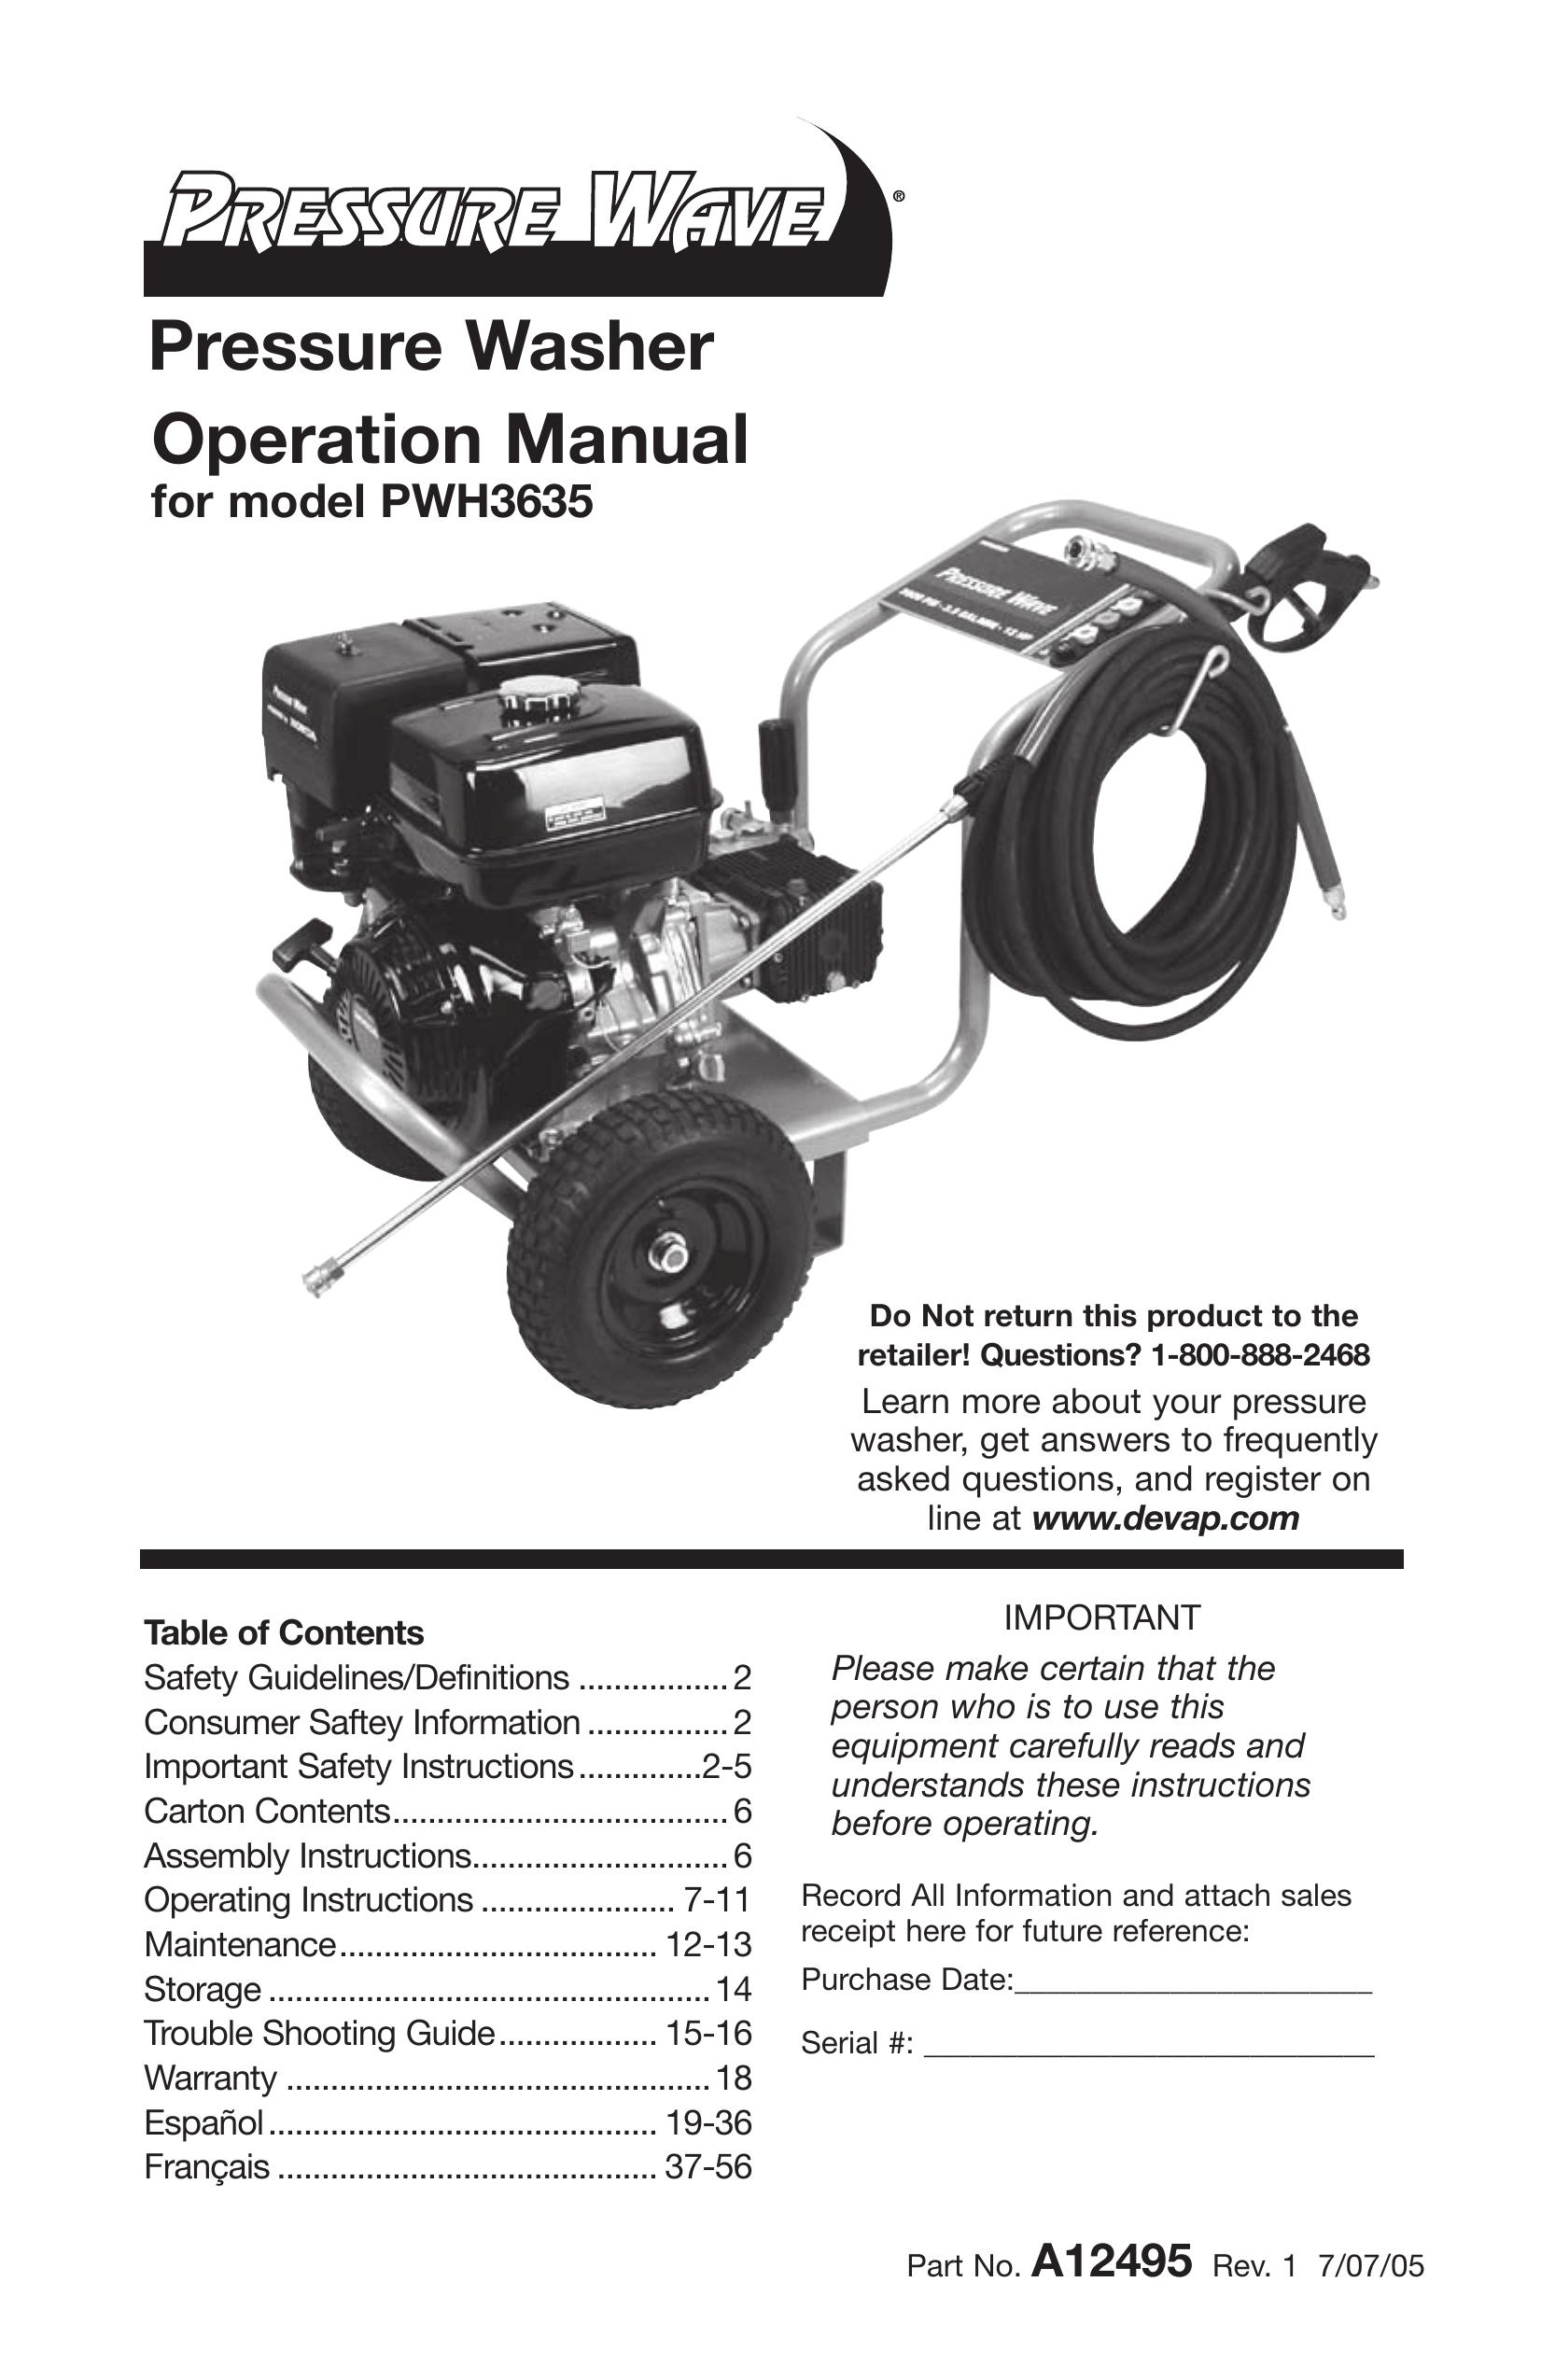 DeVillbiss Air Power Company A12495 Pressure Washer User Manual